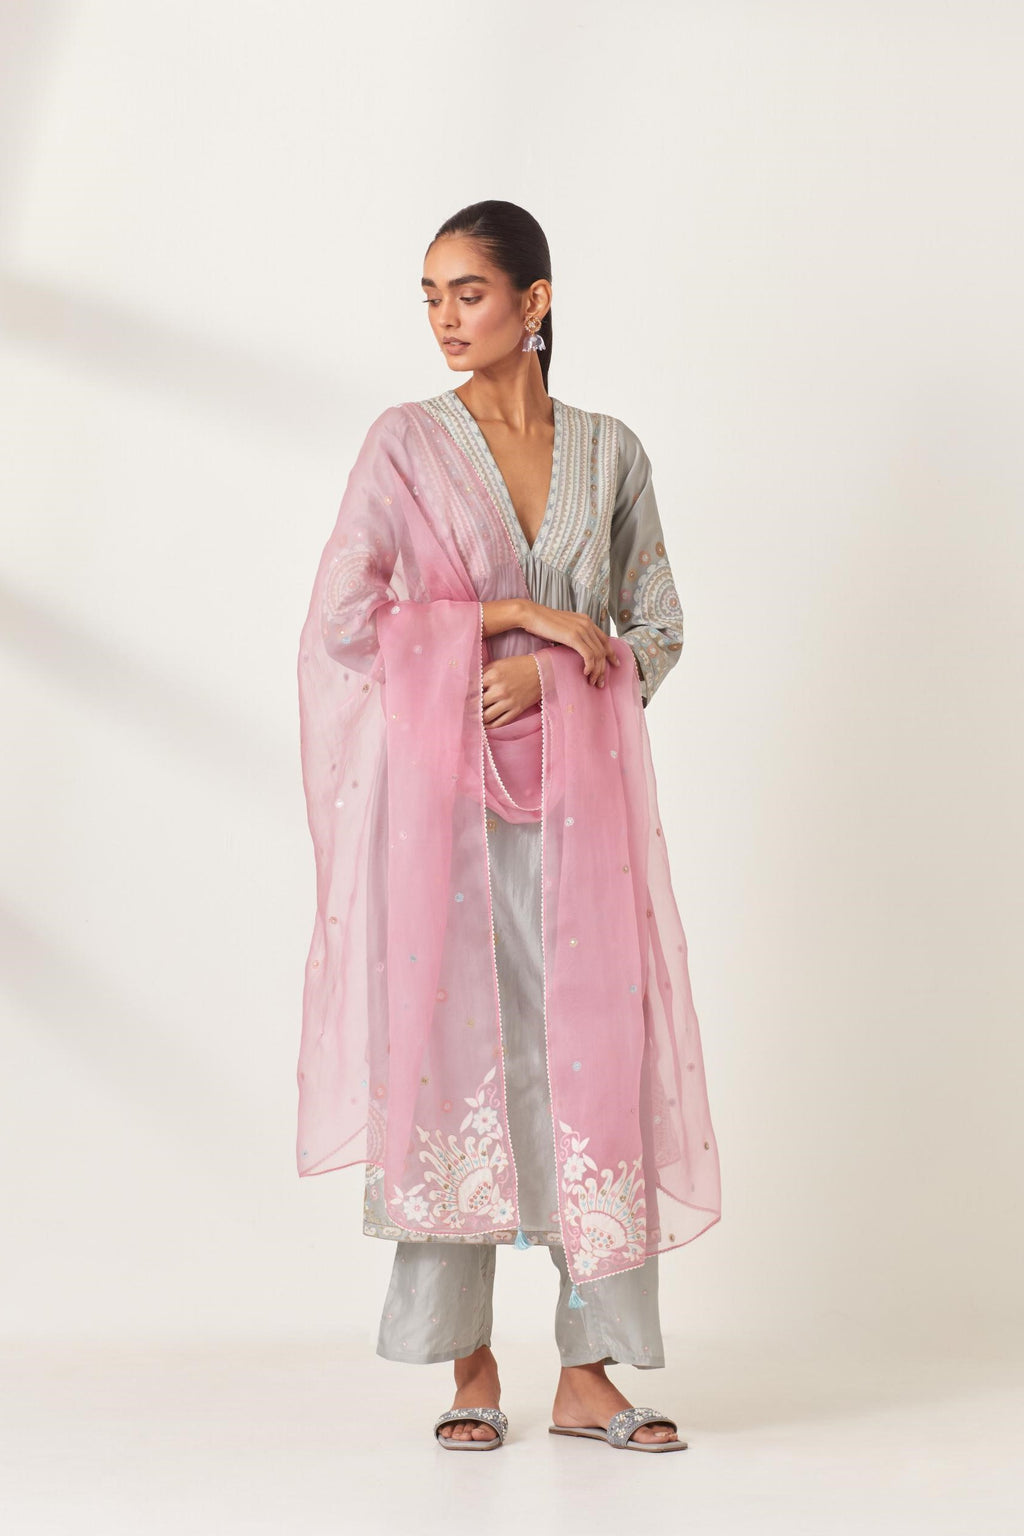 Pink silk organza dupatta with appliqué work and multi colored flower embroidery all-over the dupatta.